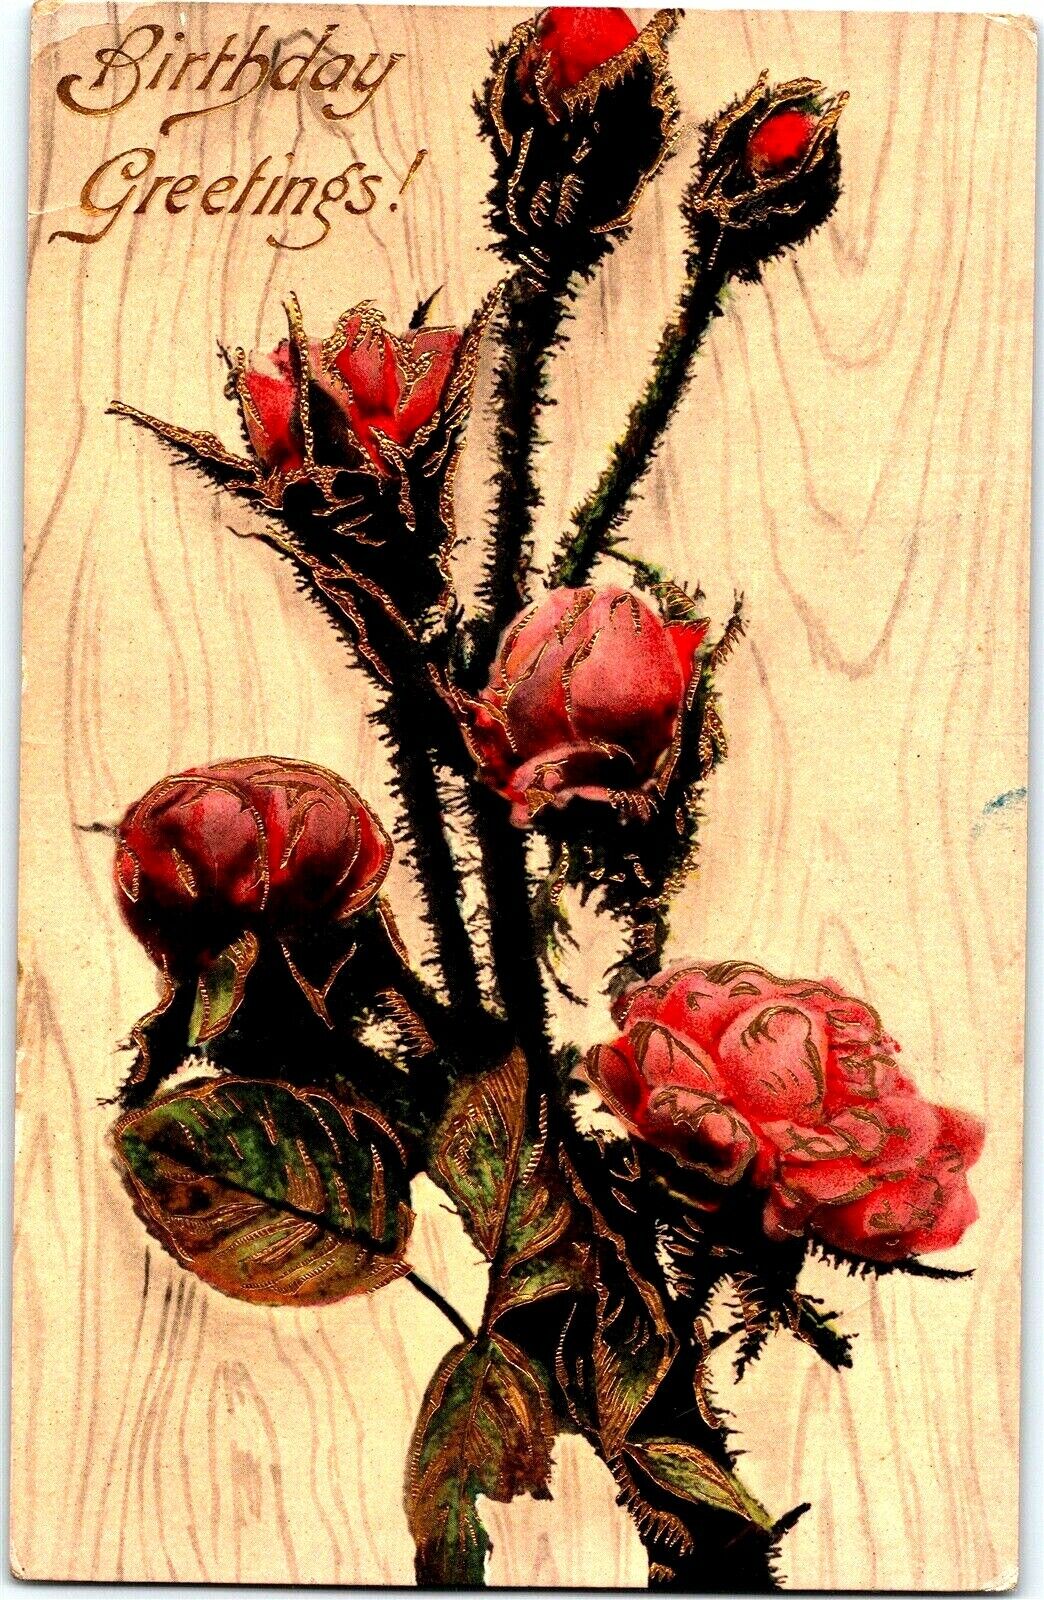 Vtg 1910s Birthday Greeting Antique Postcard Pink Roses Gold Colored Accents B10